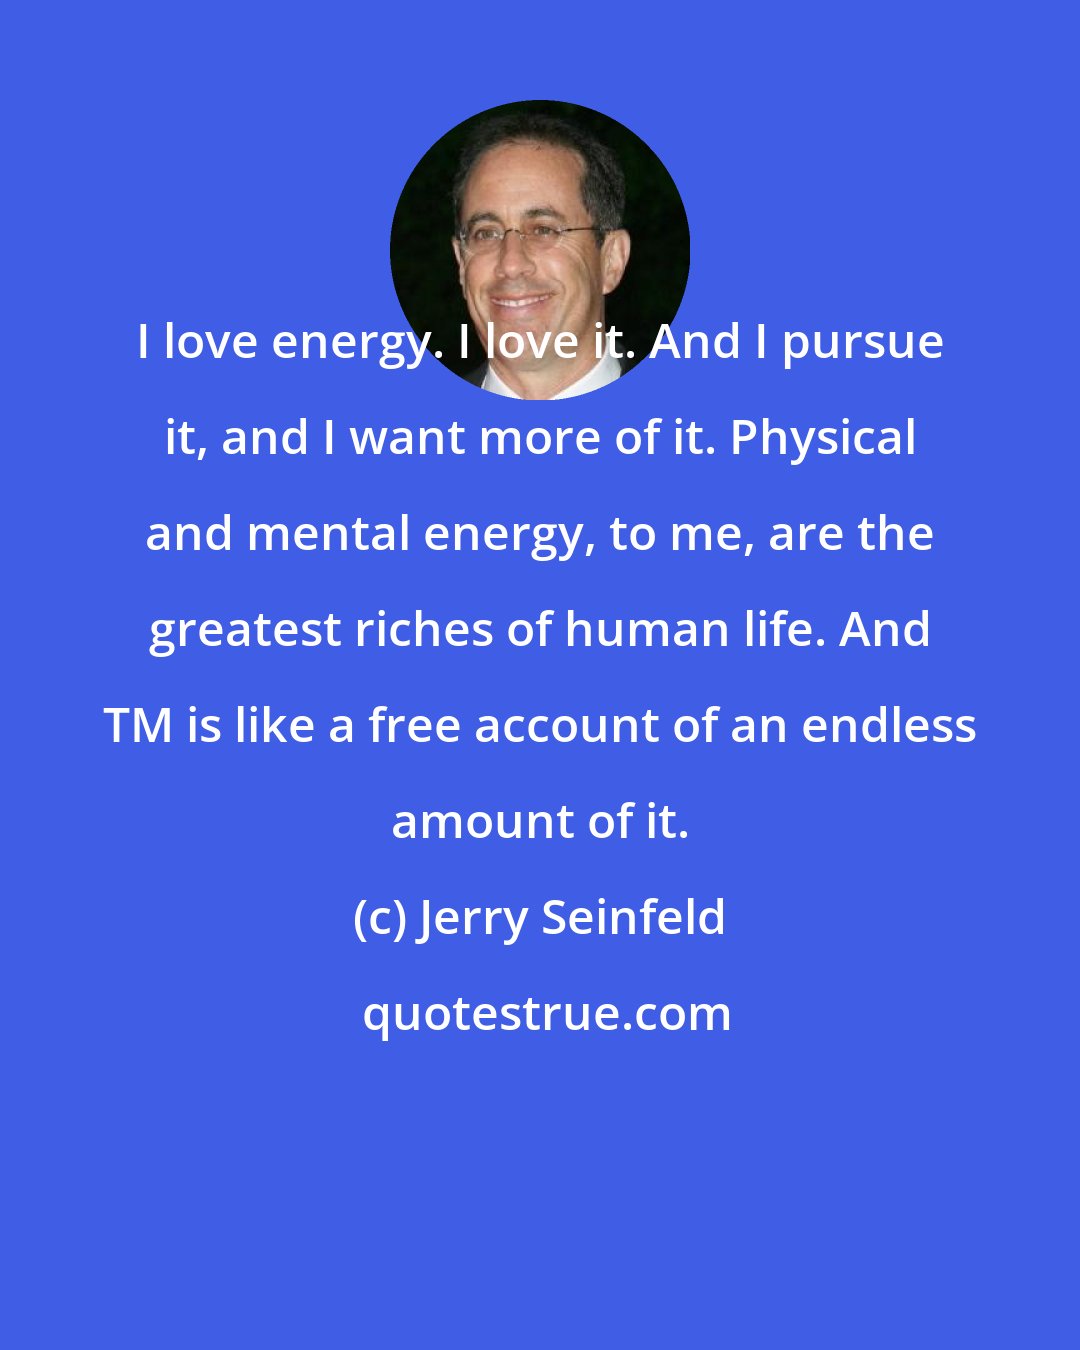 Jerry Seinfeld: I love energy. I love it. And I pursue it, and I want more of it. Physical and mental energy, to me, are the greatest riches of human life. And TM is like a free account of an endless amount of it.